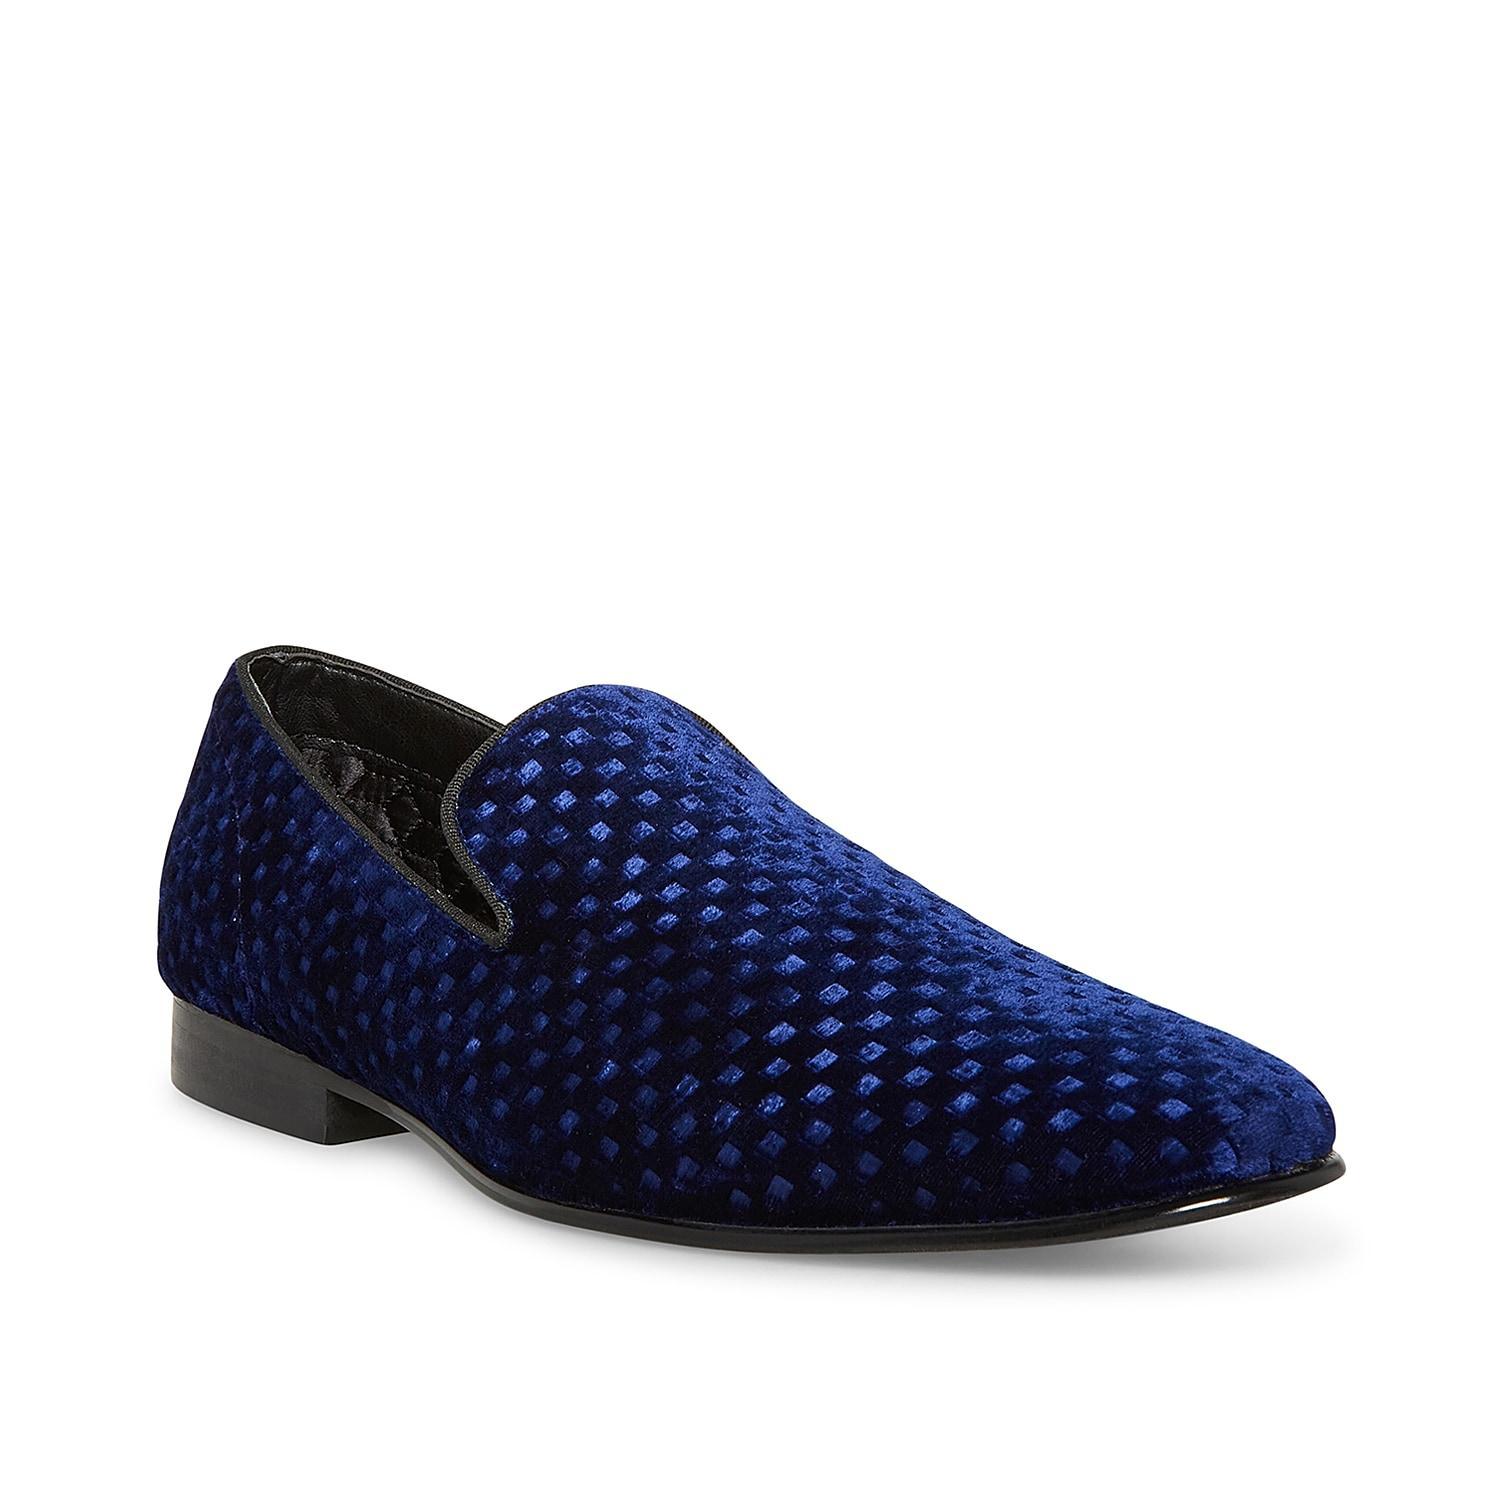 Steve Madden Lifted Smoking Slipper Product Image